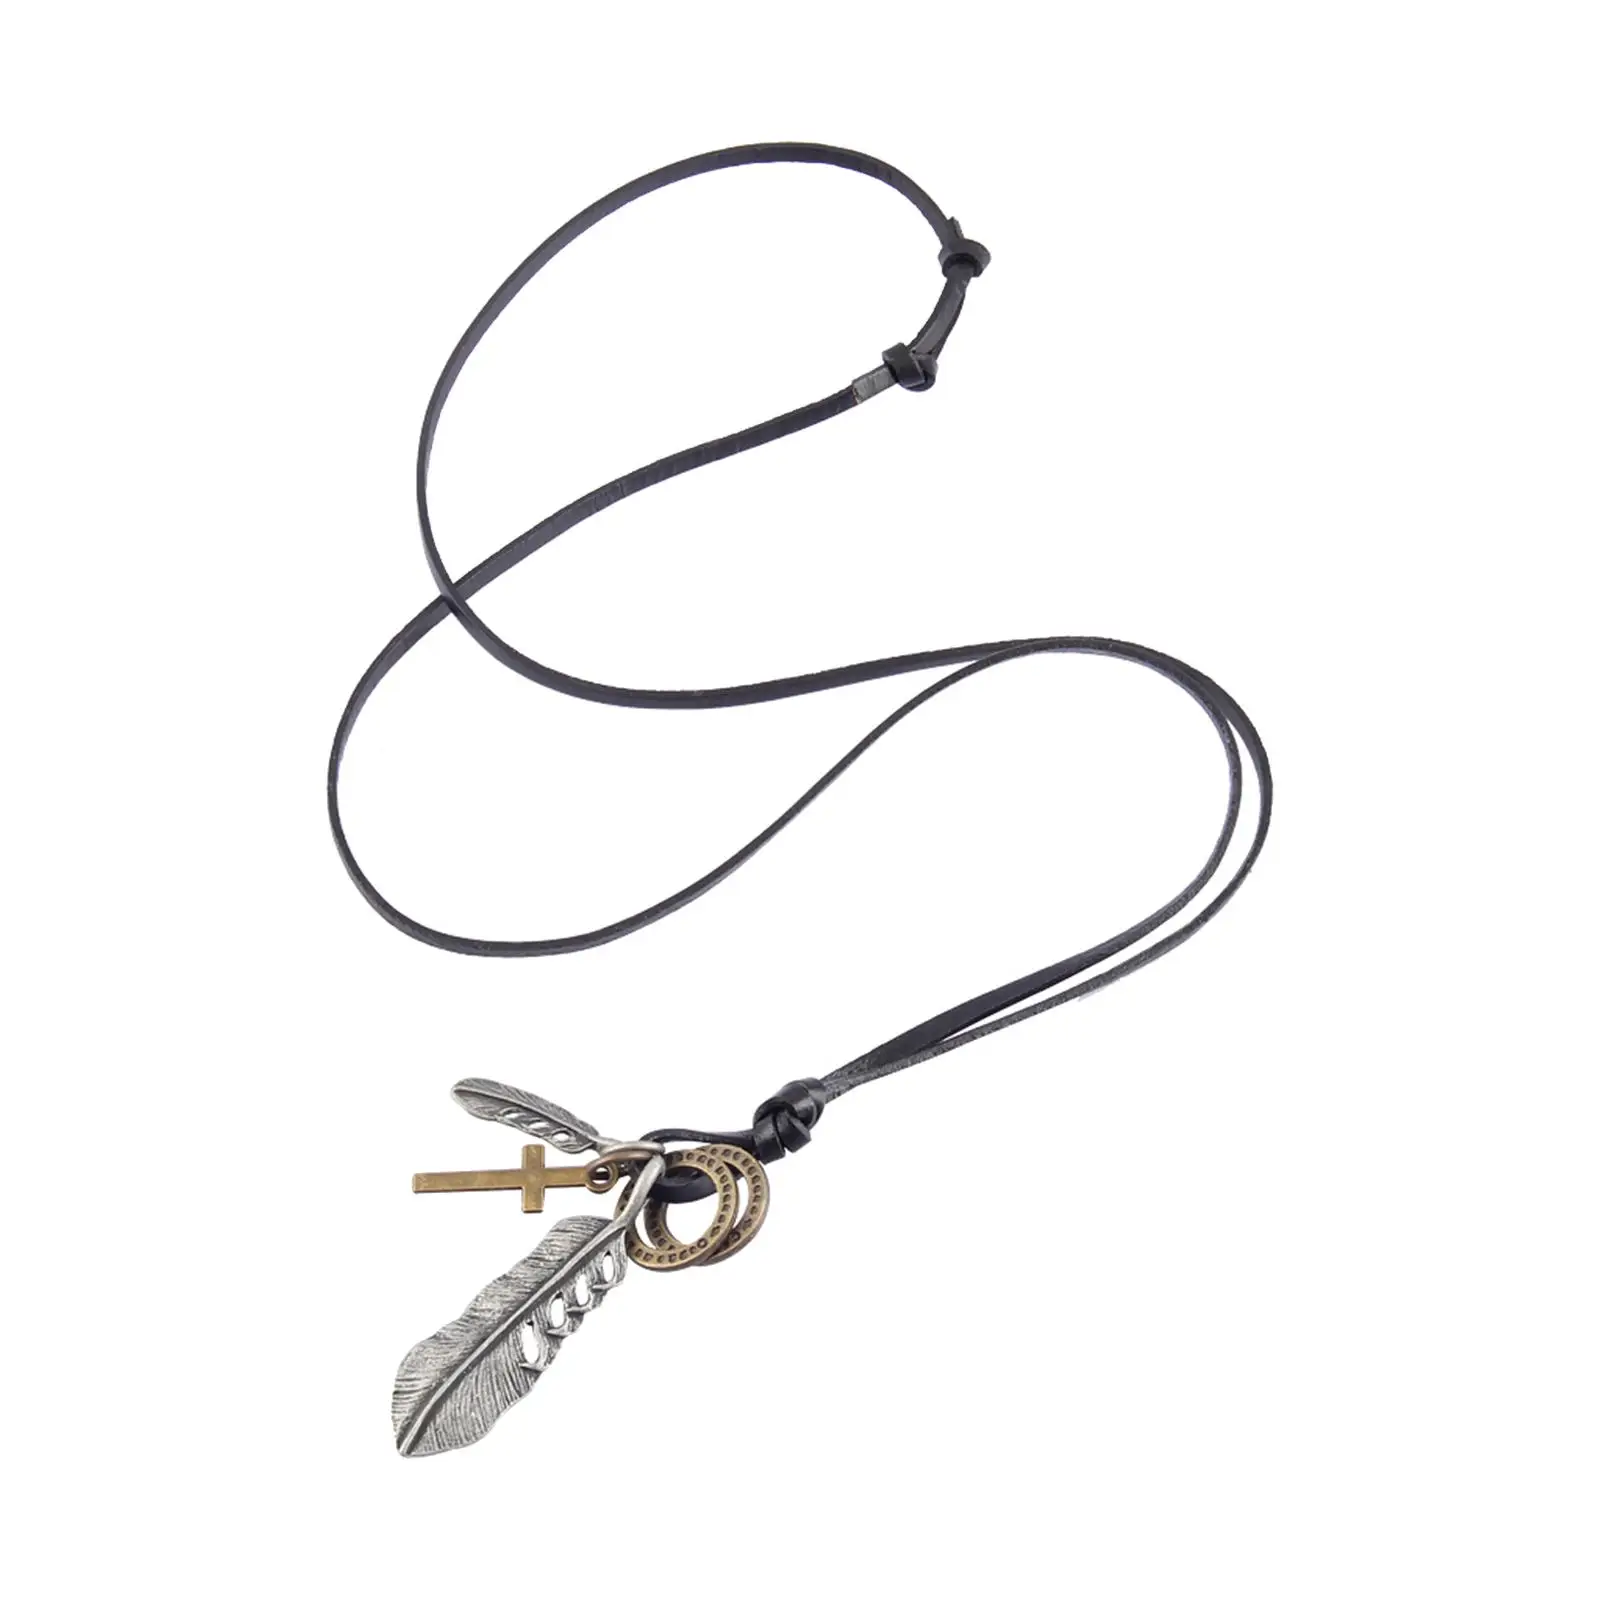 Fashionable Necklace Long Cord Decorative Hip Hop Jewelry Feather Cross Pendant Creative Bola Tie for Travel Daily Work Holiday